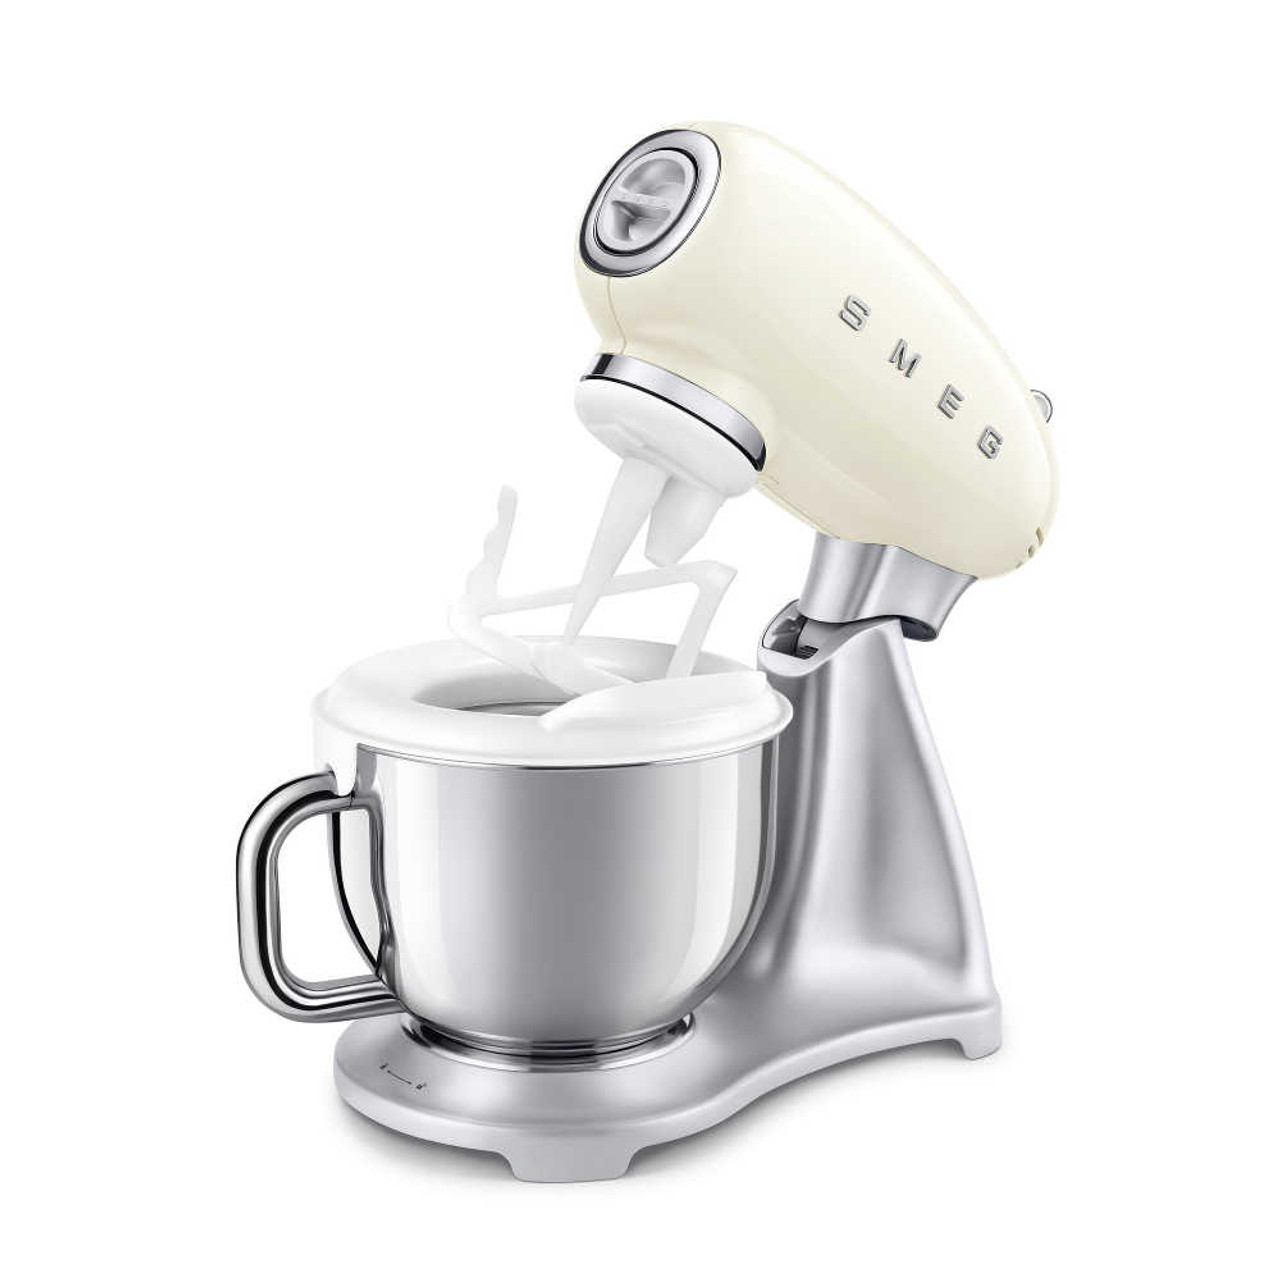 https://cdn11.bigcommerce.com/s-hccytny0od/images/stencil/1280x1280/products/4906/20618/SMEG_Stand_Mixer_Ice_Cream_Maker_Accessory_5__99815.1657670867.jpg?c=2?imbypass=on